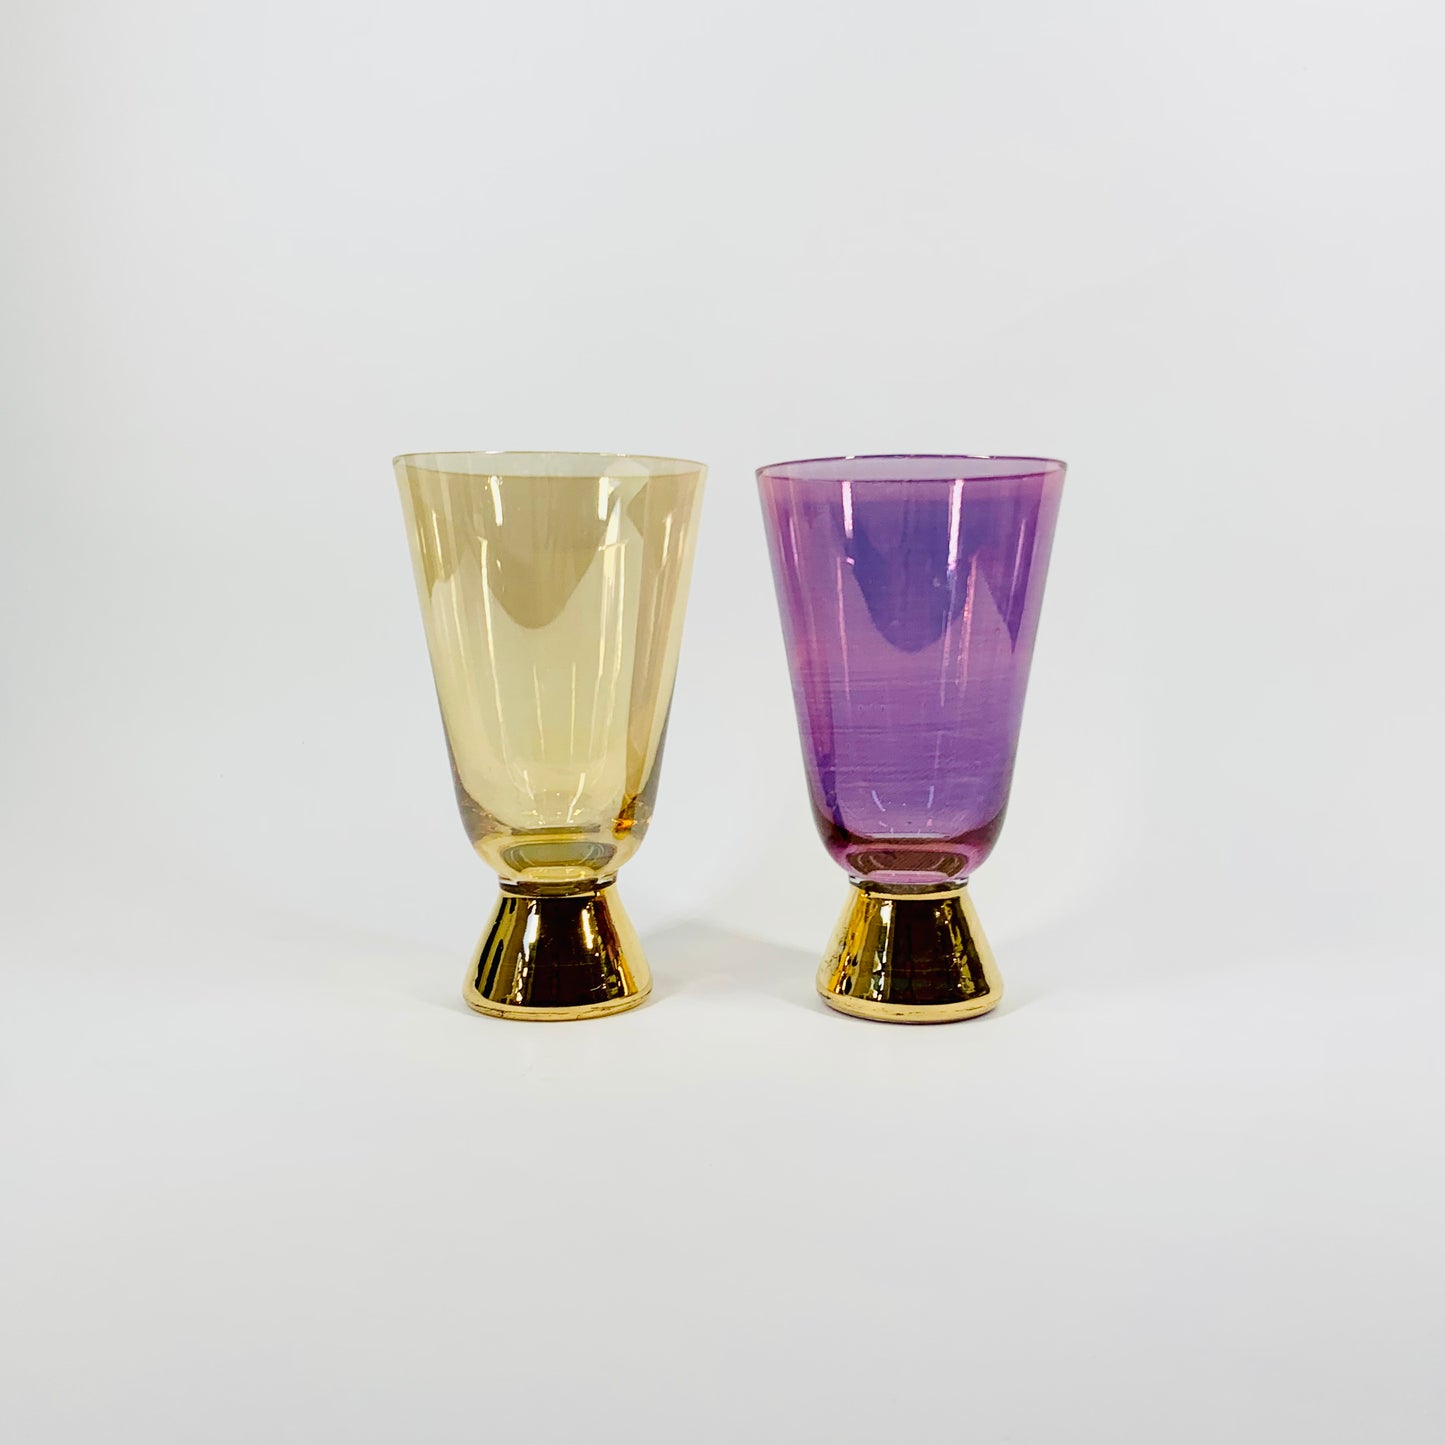 Midcentury iridescent footed harlequin glasses